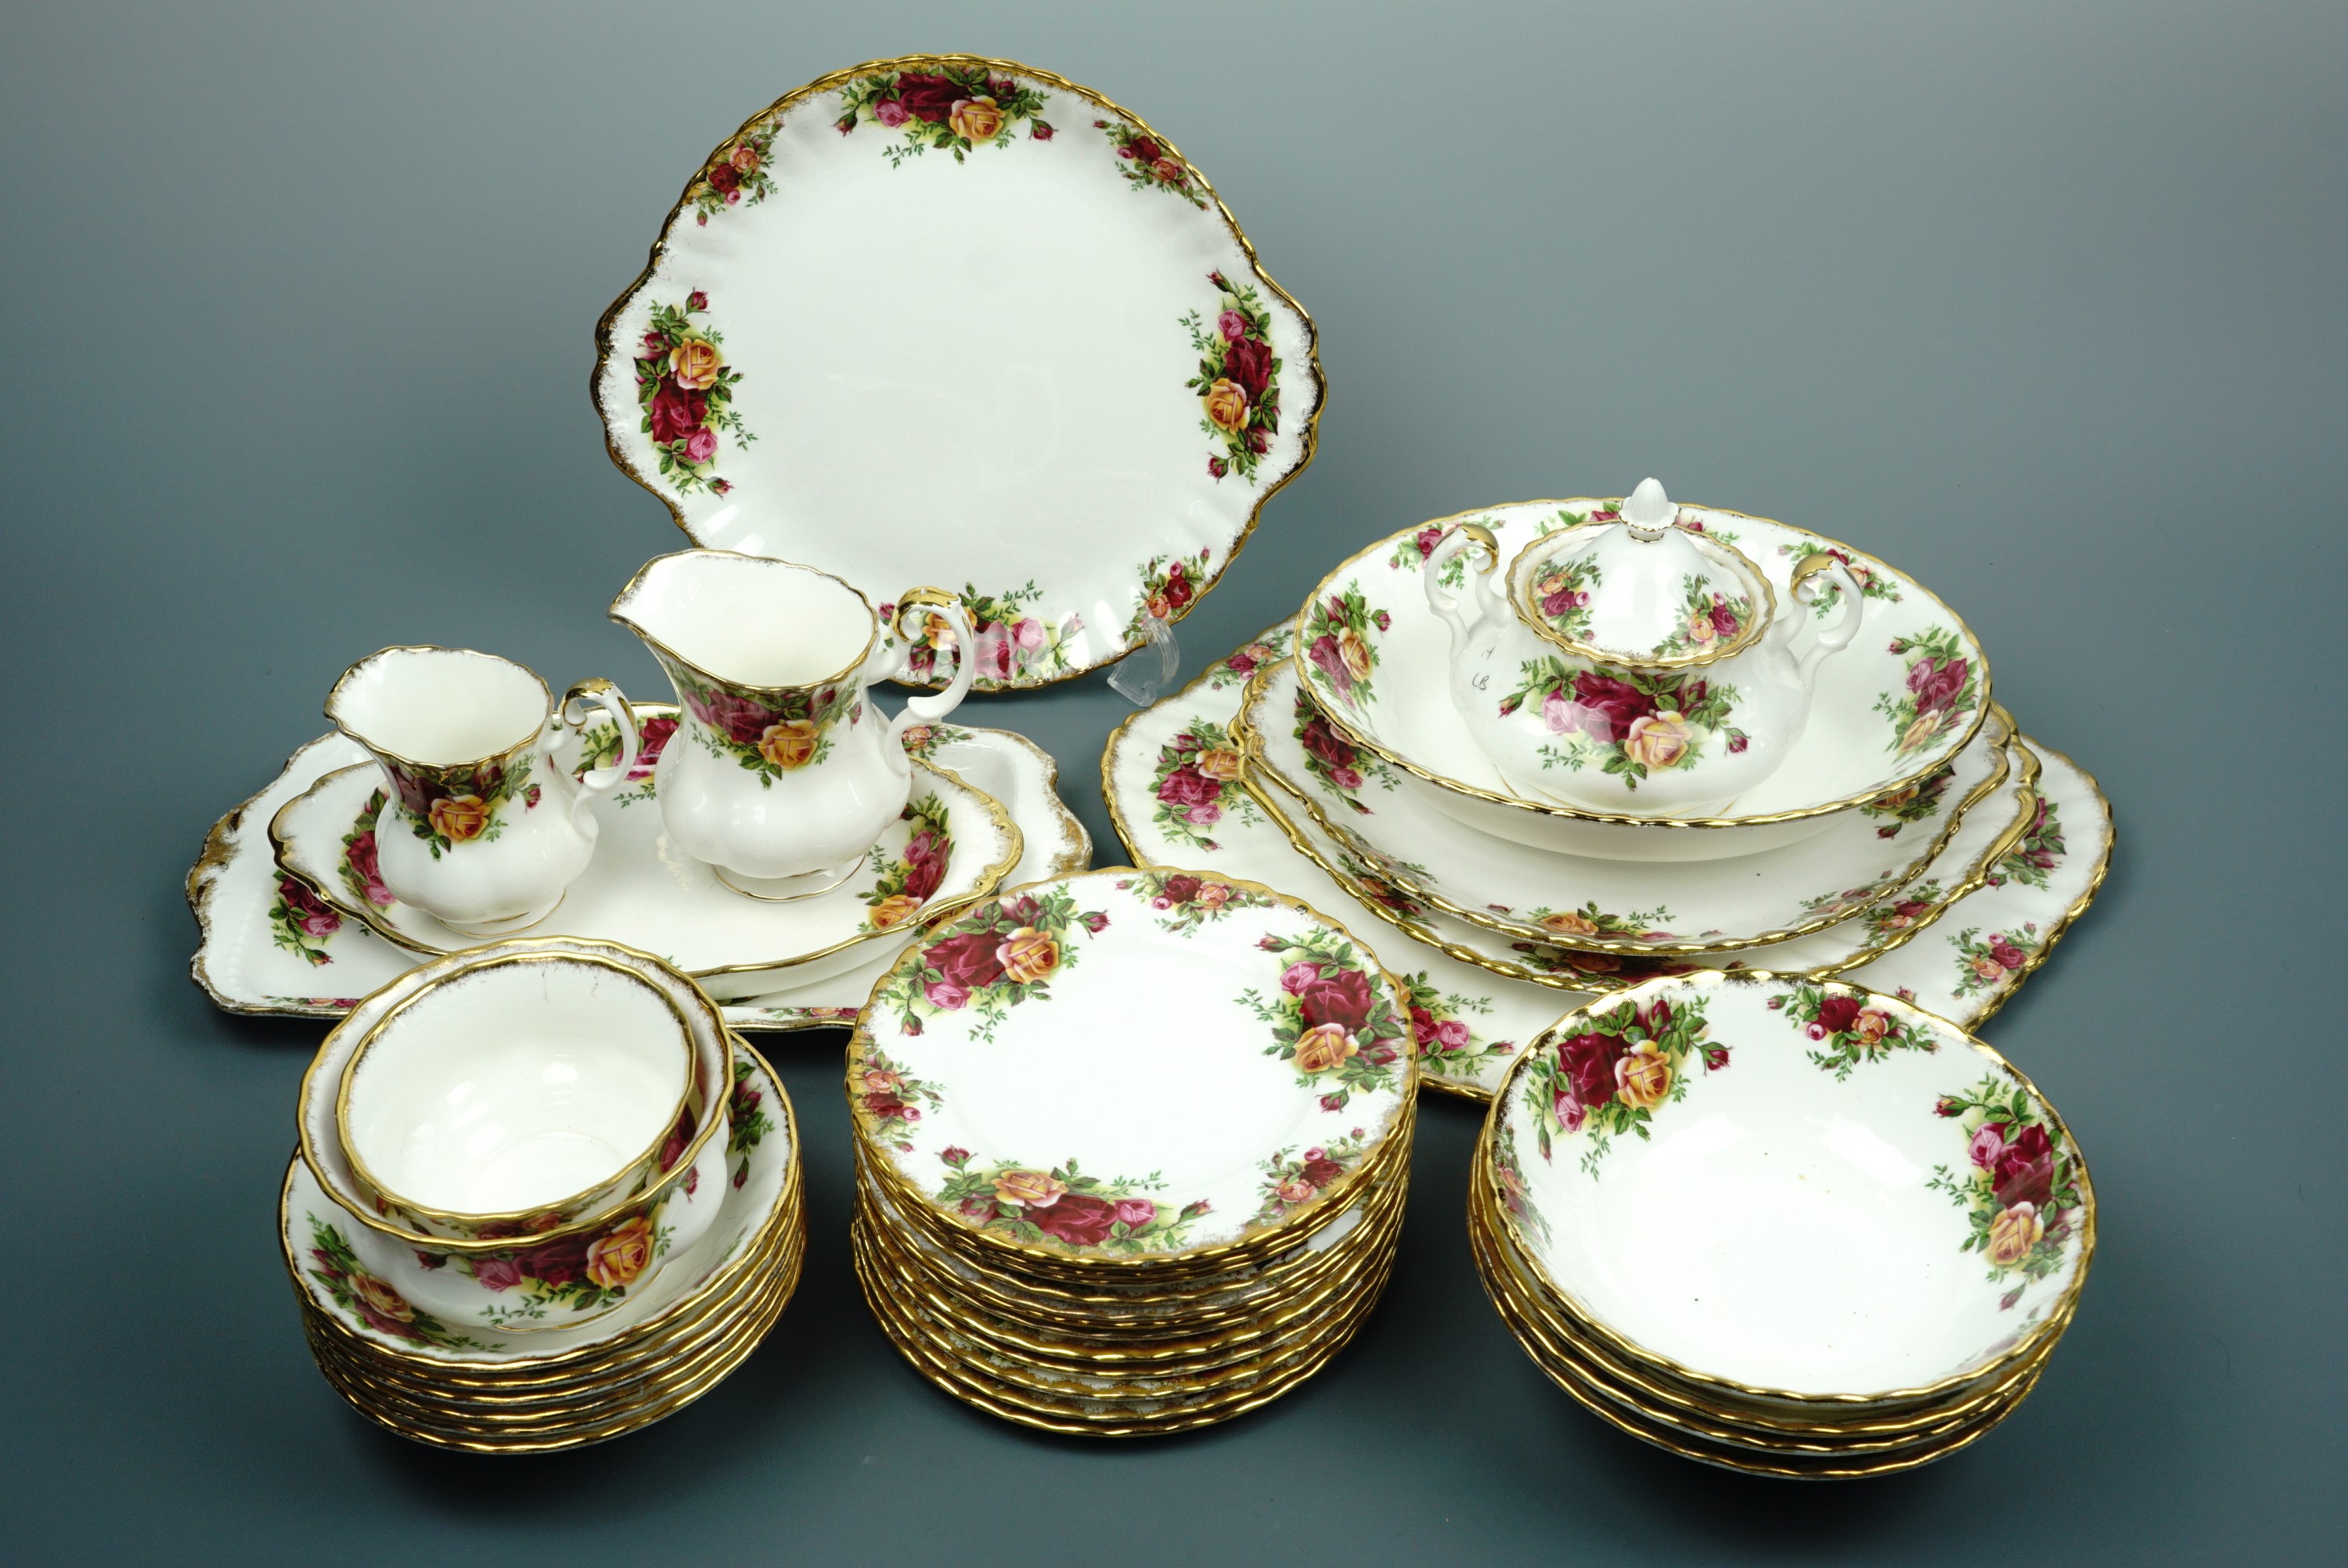 A quantity of Royal Albert Old Country Rose tea and dinnerware, approximately 75 items - Image 2 of 3